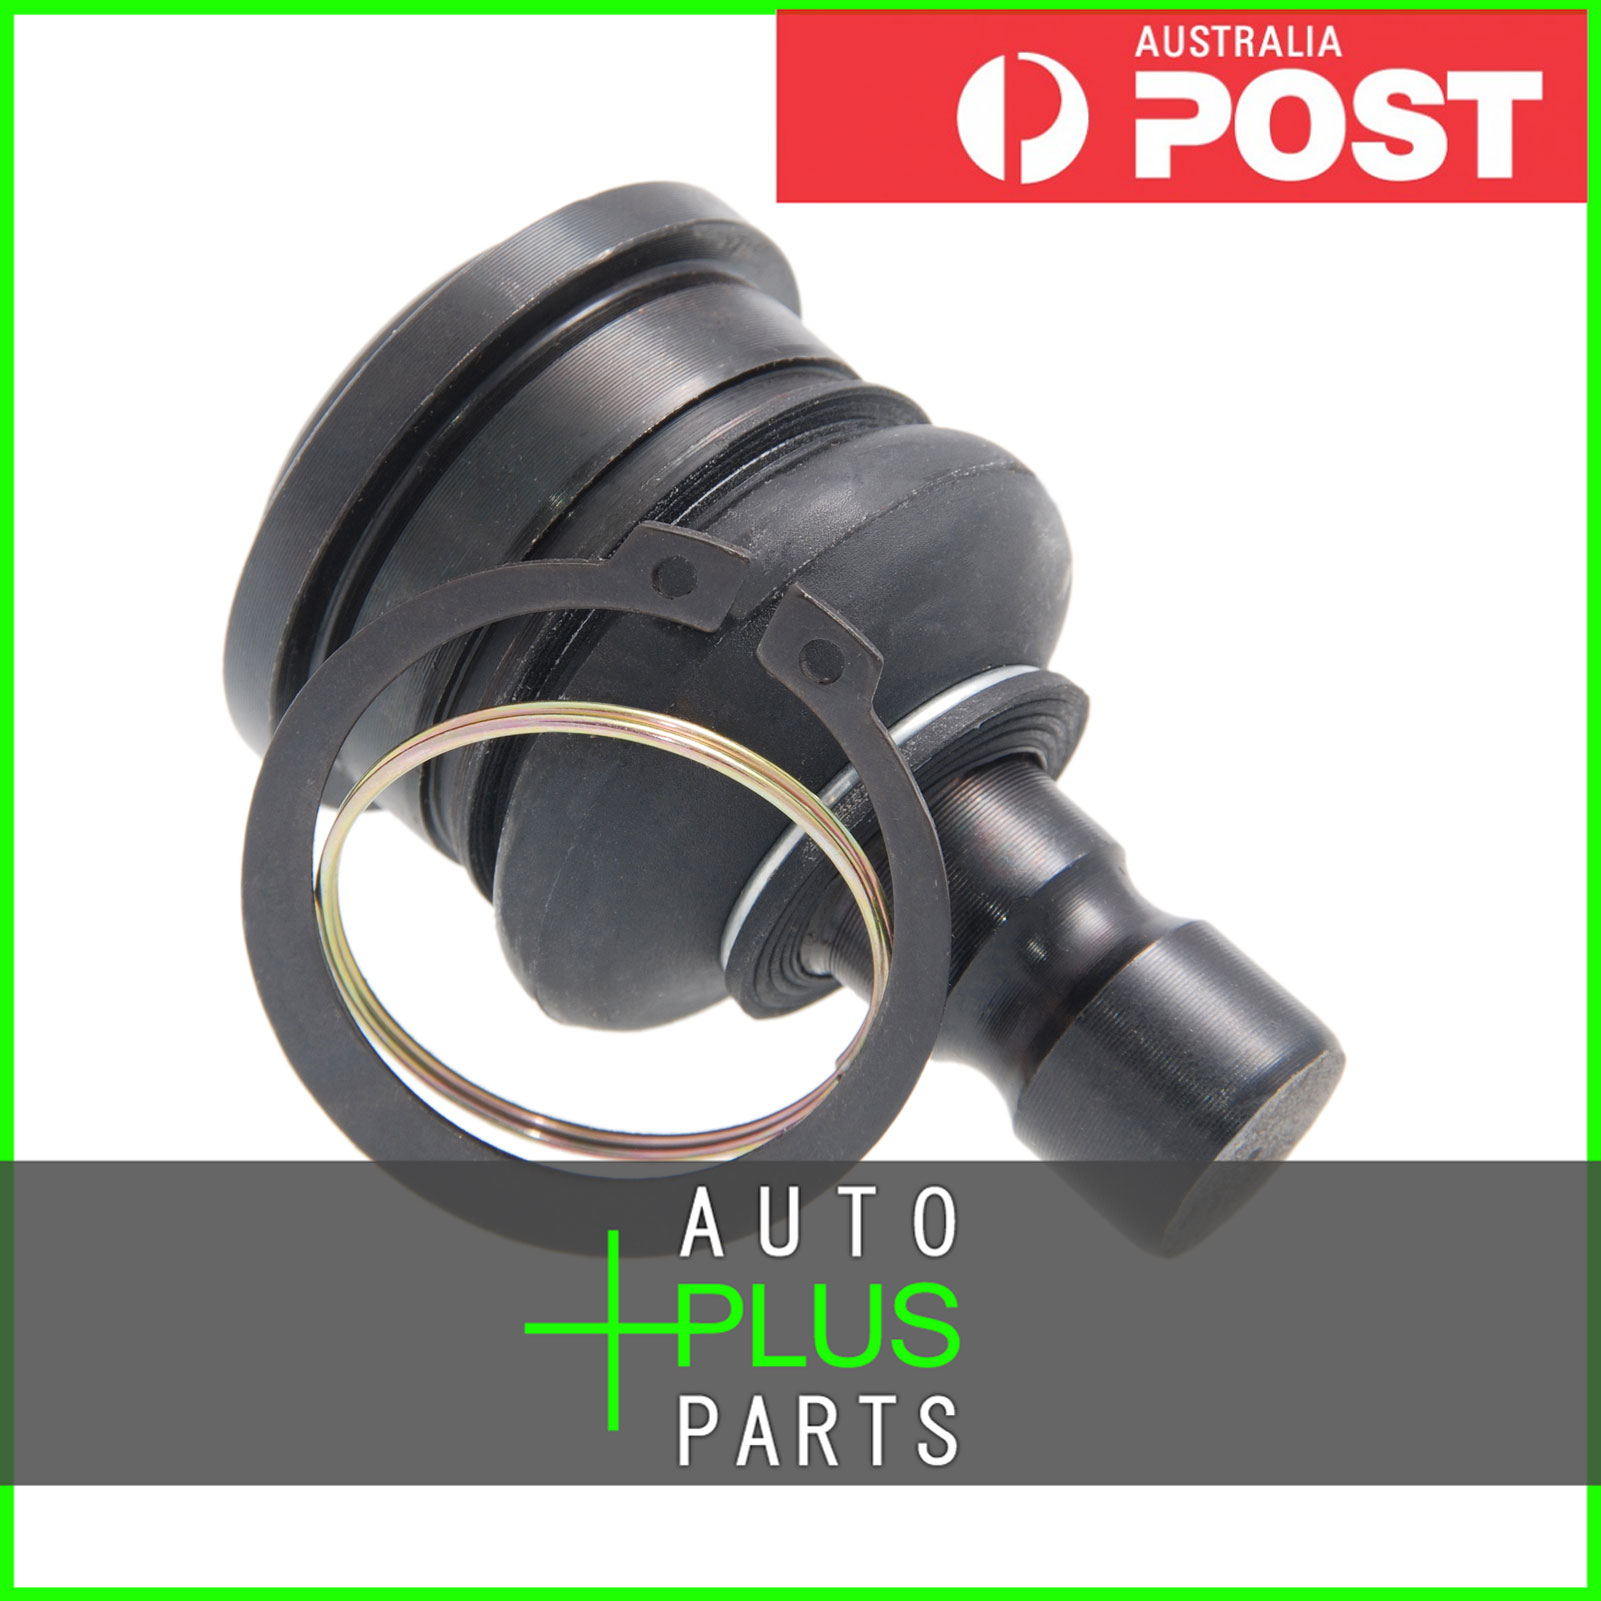 Fits HYUNDAI GRAND I10 - BALL JOINT FRONT LOWER ARM | eBay